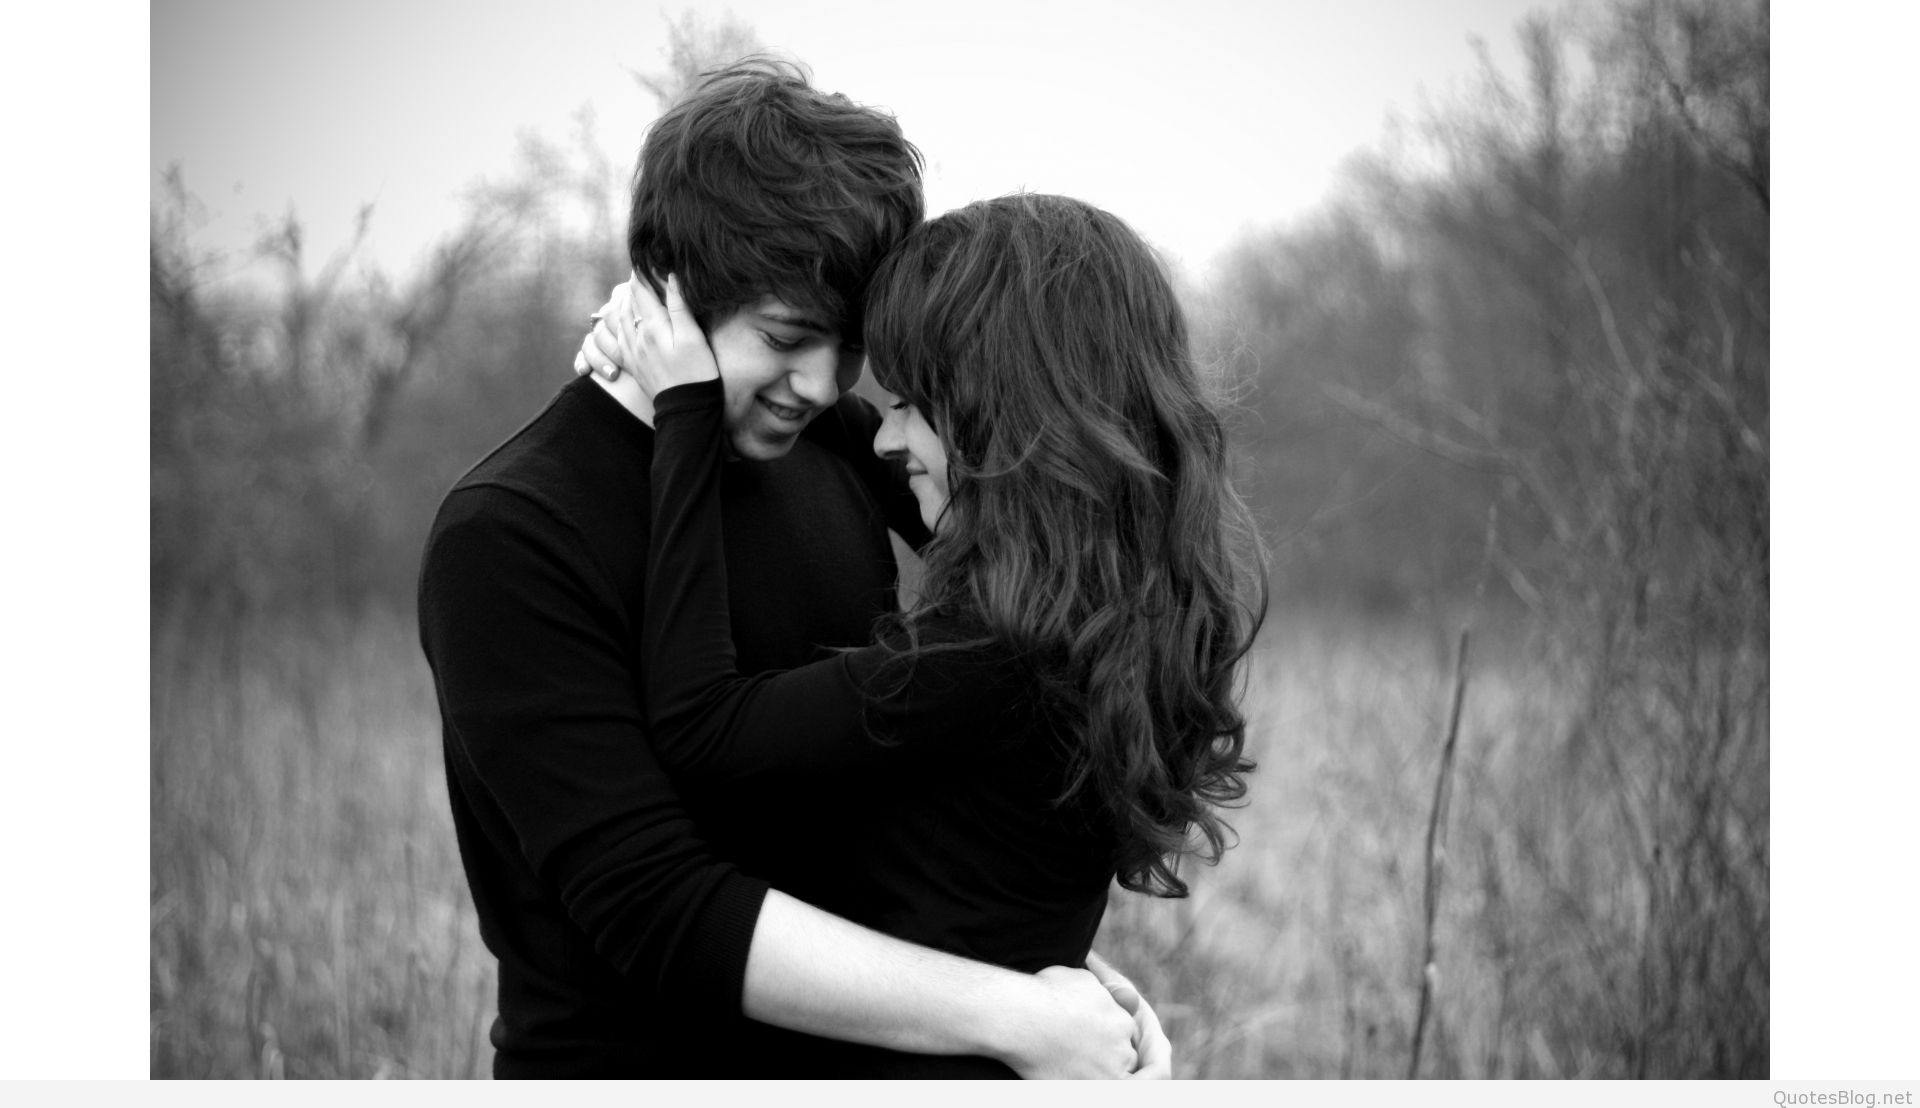 sweet couple wallpaper,people in nature,photograph,romance,love,black and white